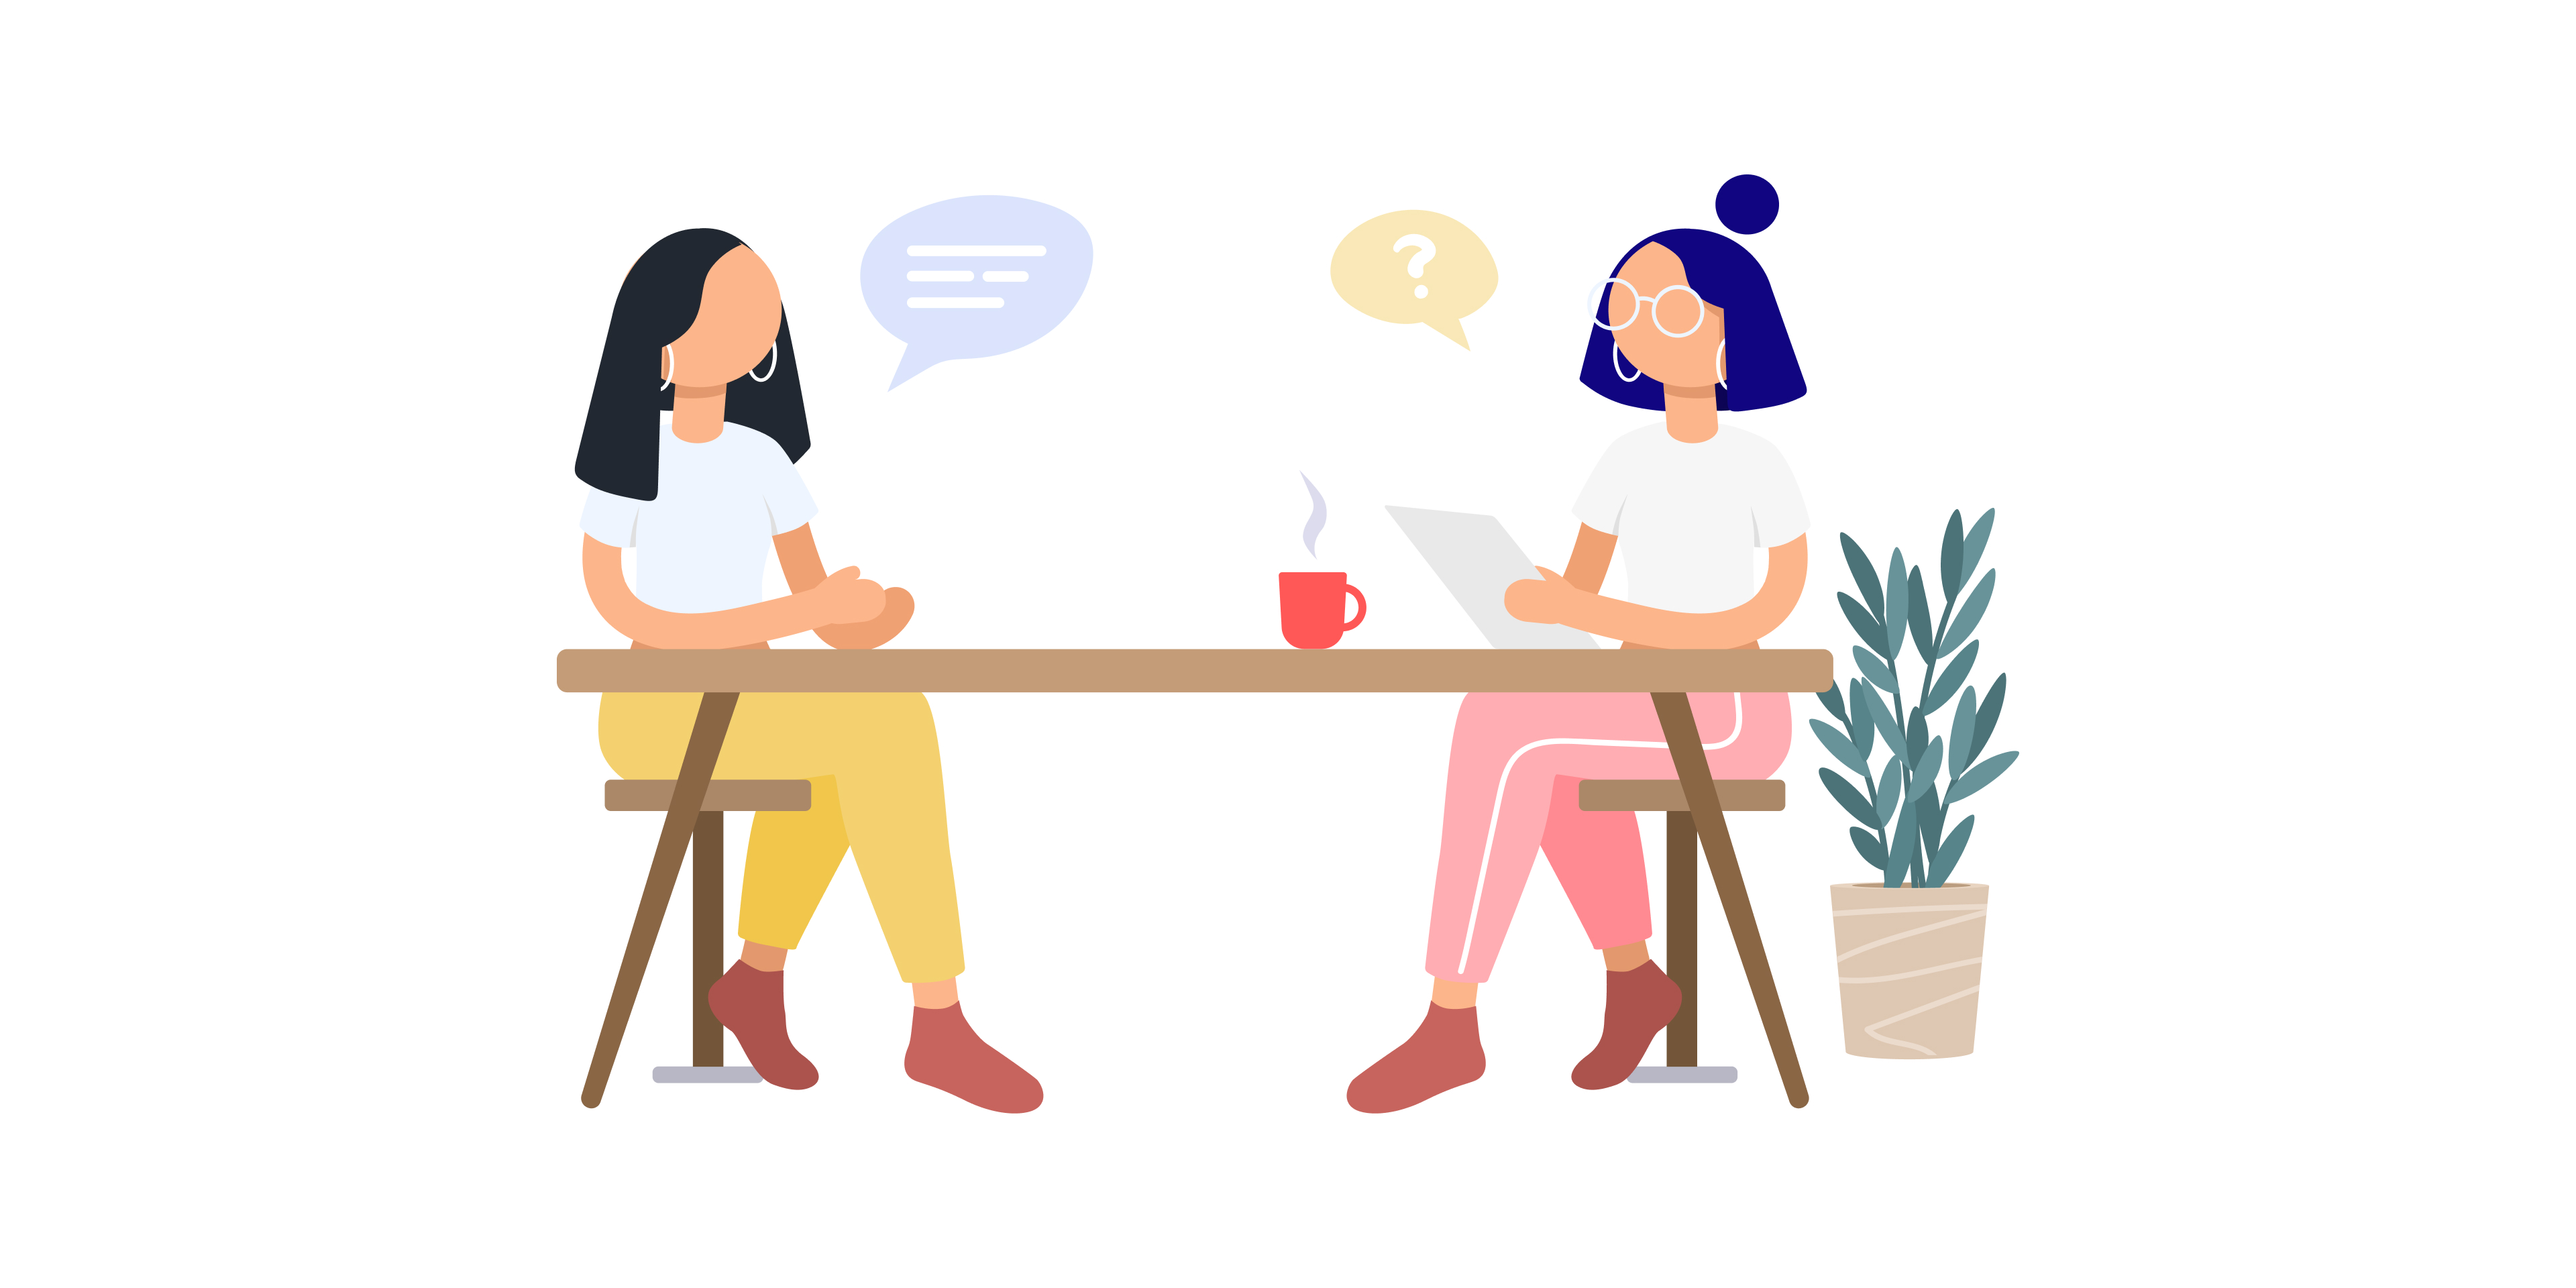 Illustration of two women sitting at a table, one being interviewed by the other